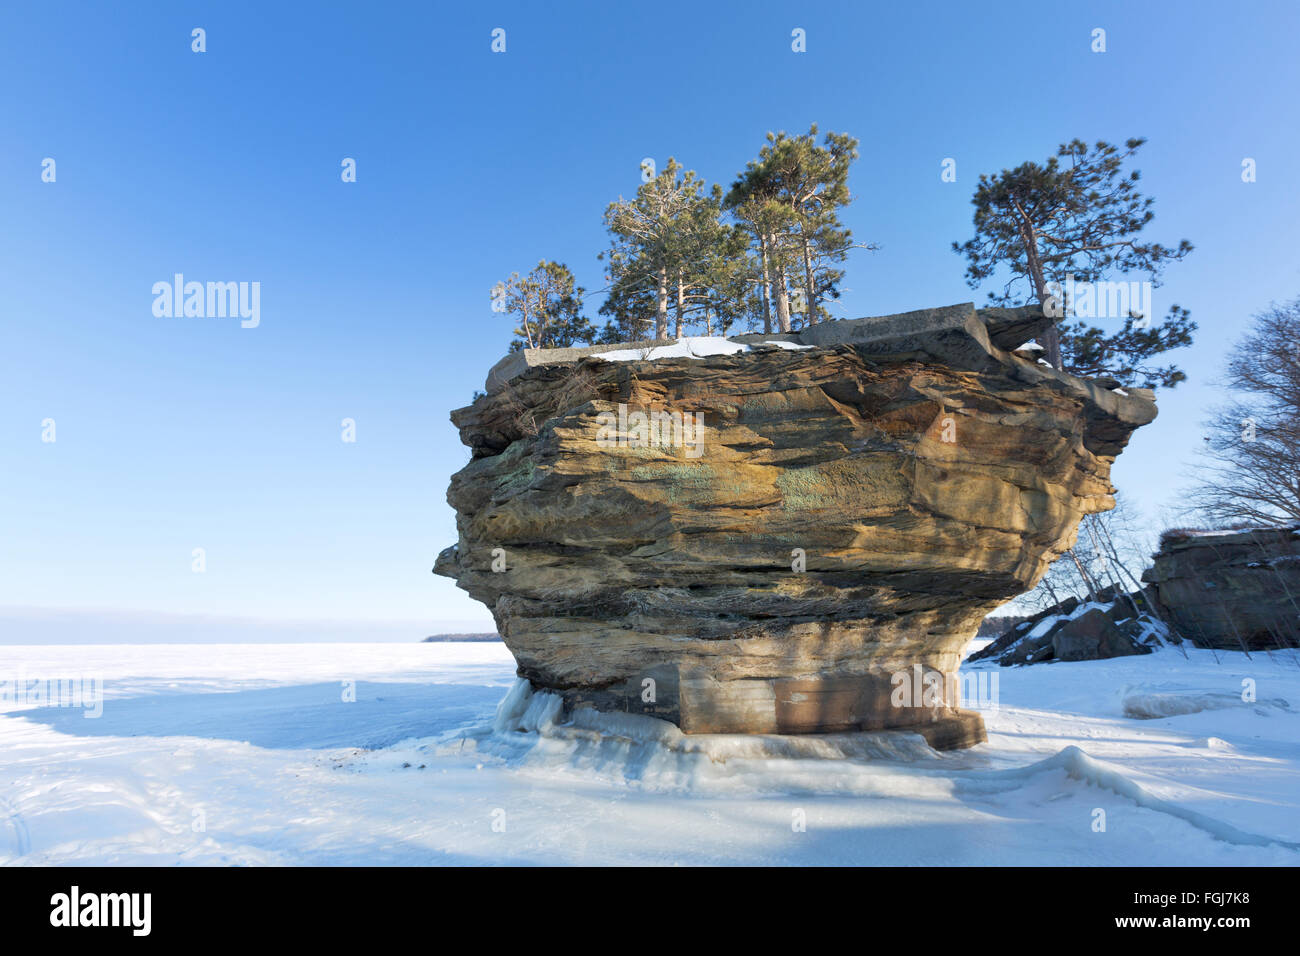 This sea stack of rock, known as Turnip Rock, rises from the ice of a frozen Lake Huron in winter. Port Austin Michigan Stock Photo